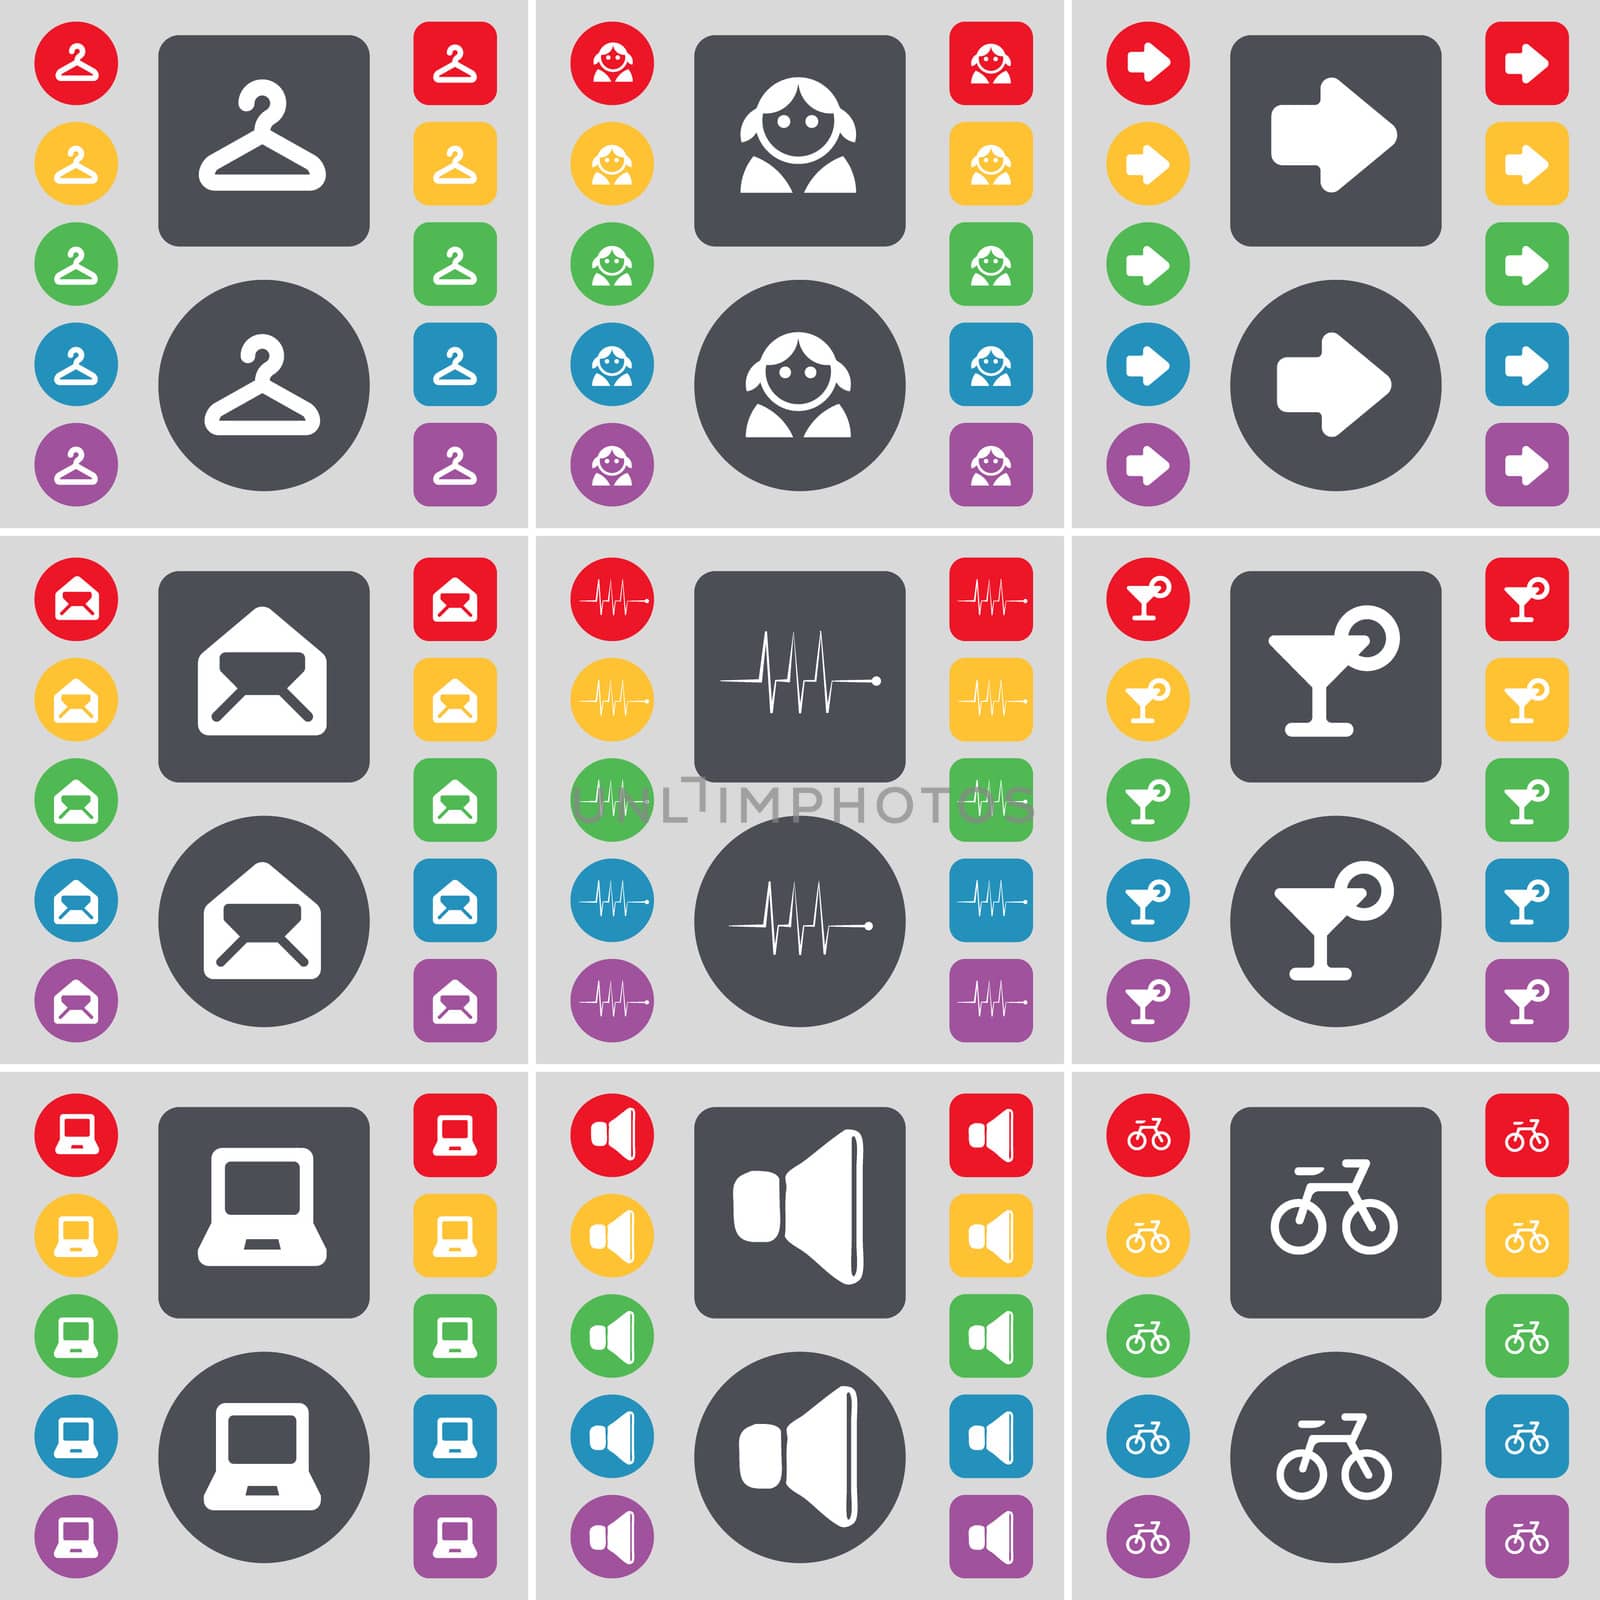 Hager, Avatar, Arrow right, Message, Pulse, Cocktail, Laptop, Sound, Bicycle icon symbol. A large set of flat, colored buttons for your design.  by serhii_lohvyniuk